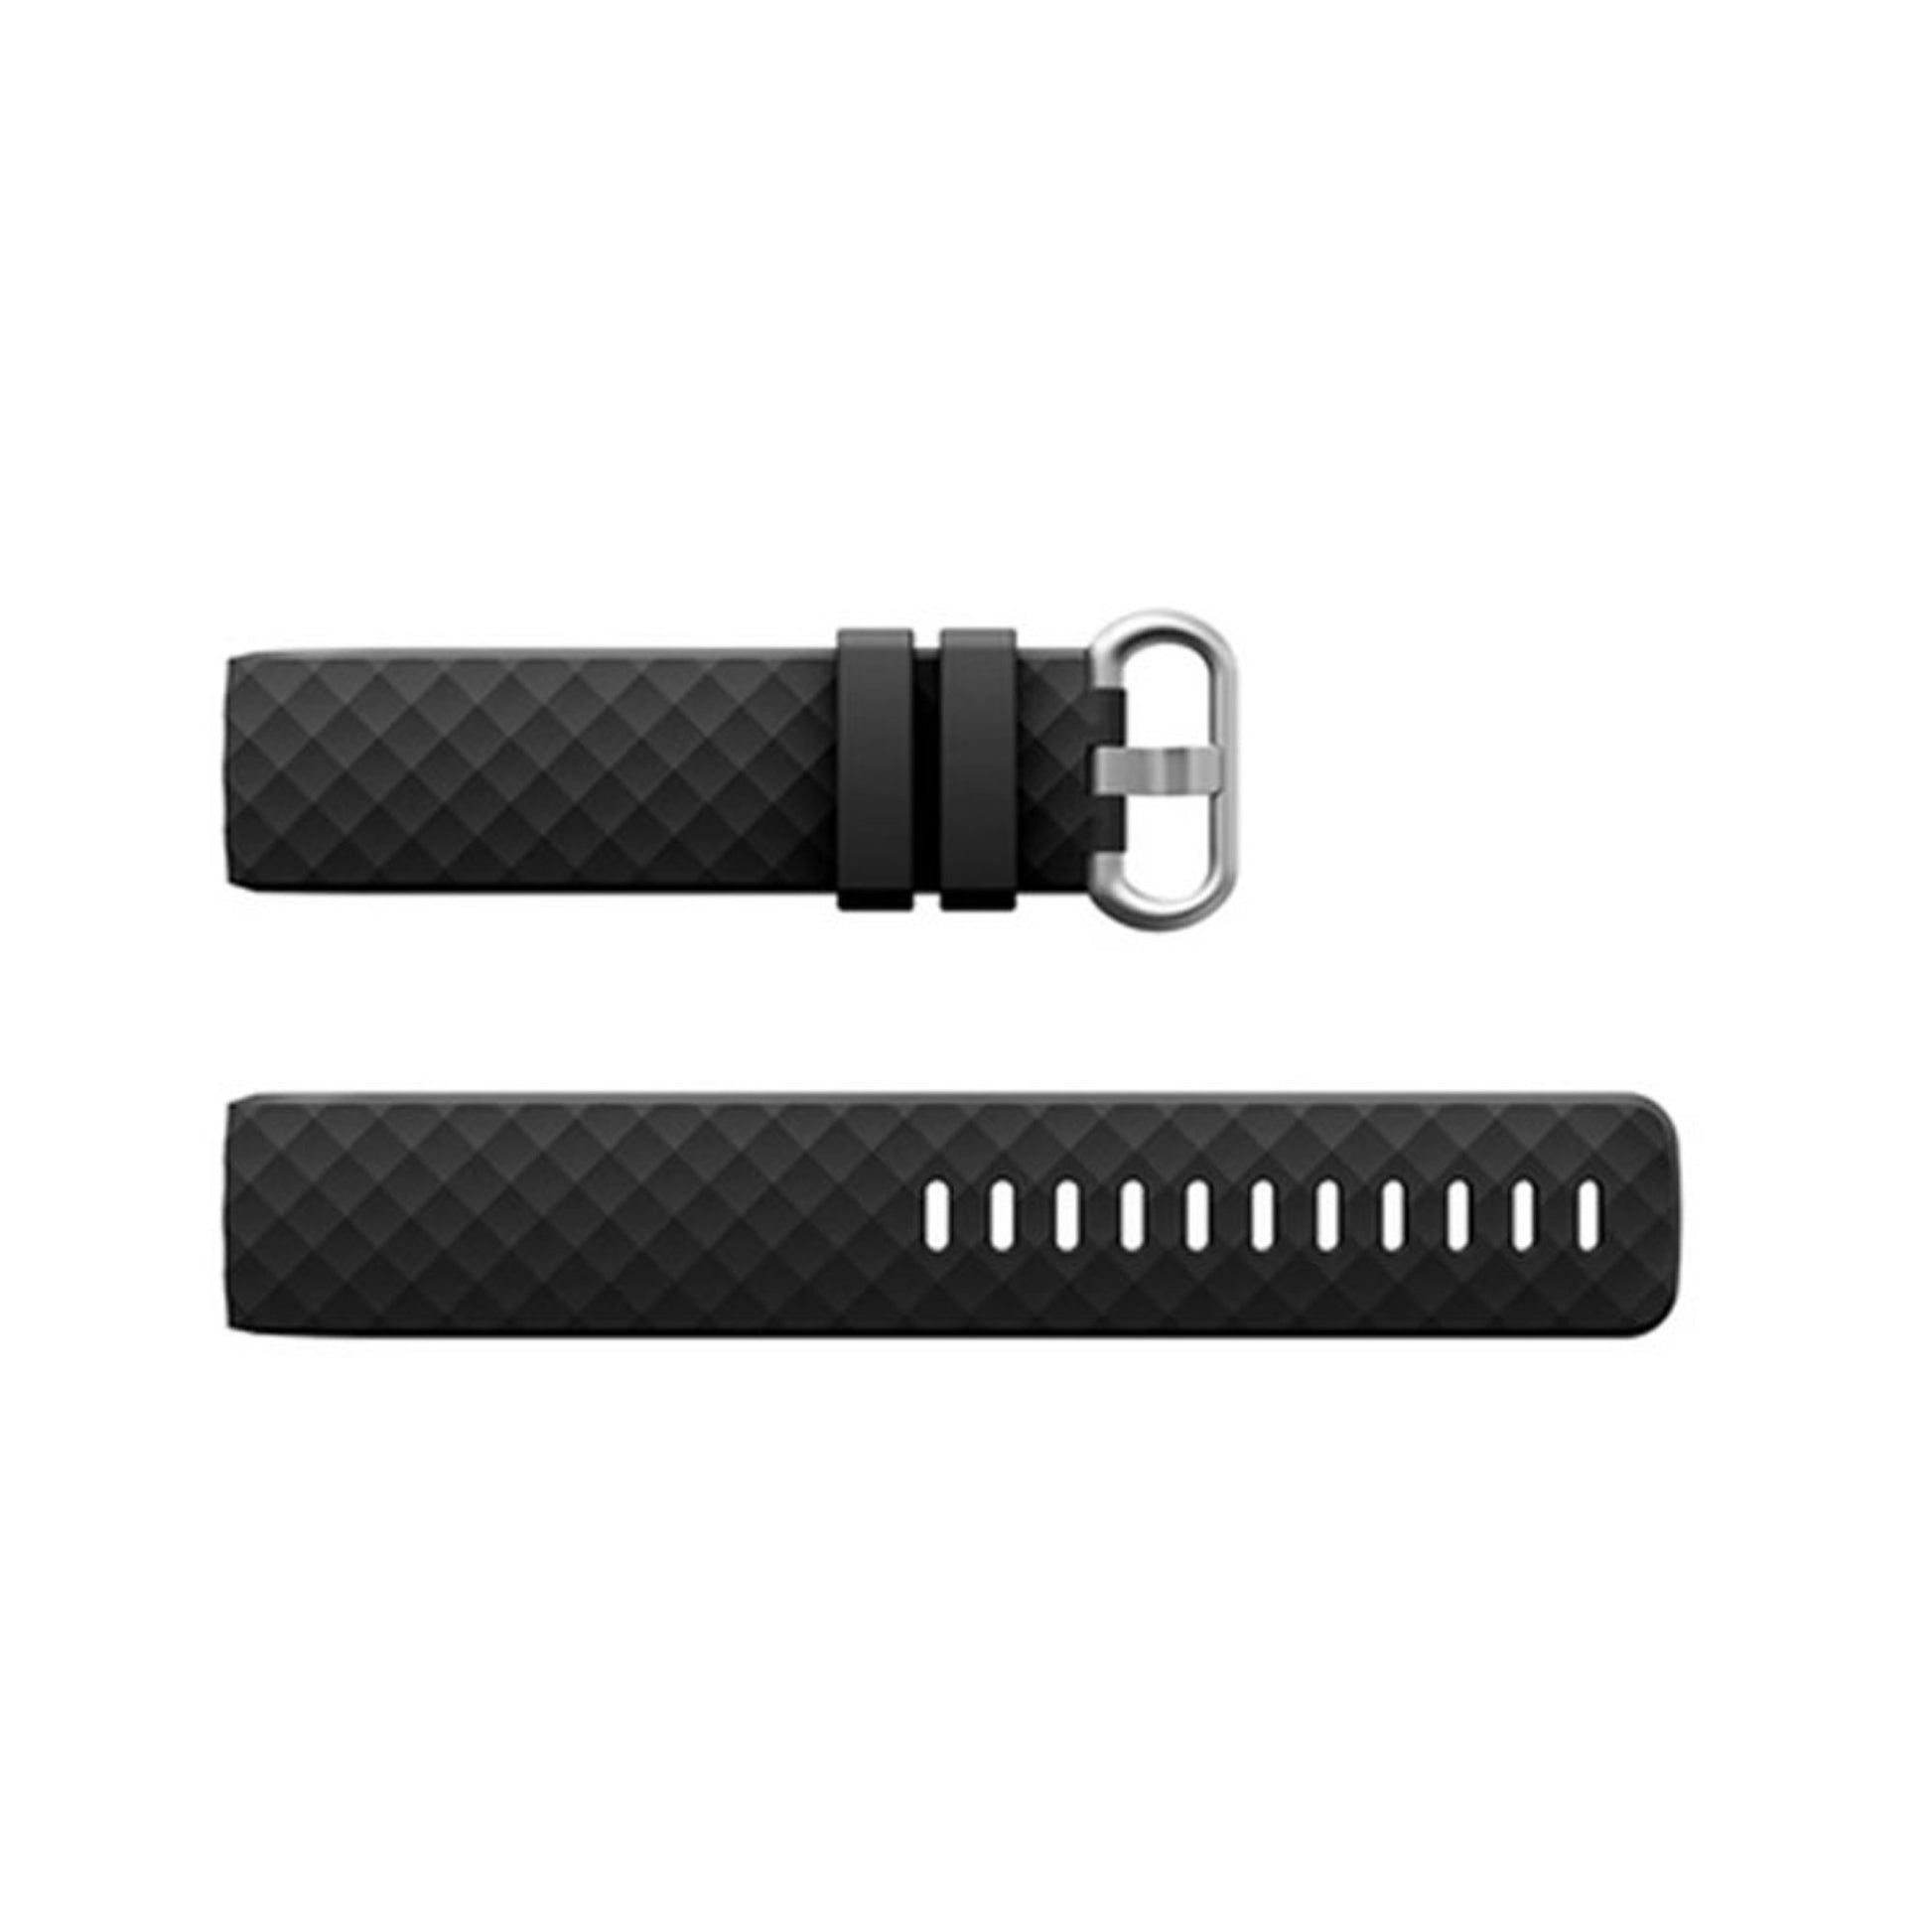 Silicone Band for Fitbit Charge 3 - Black